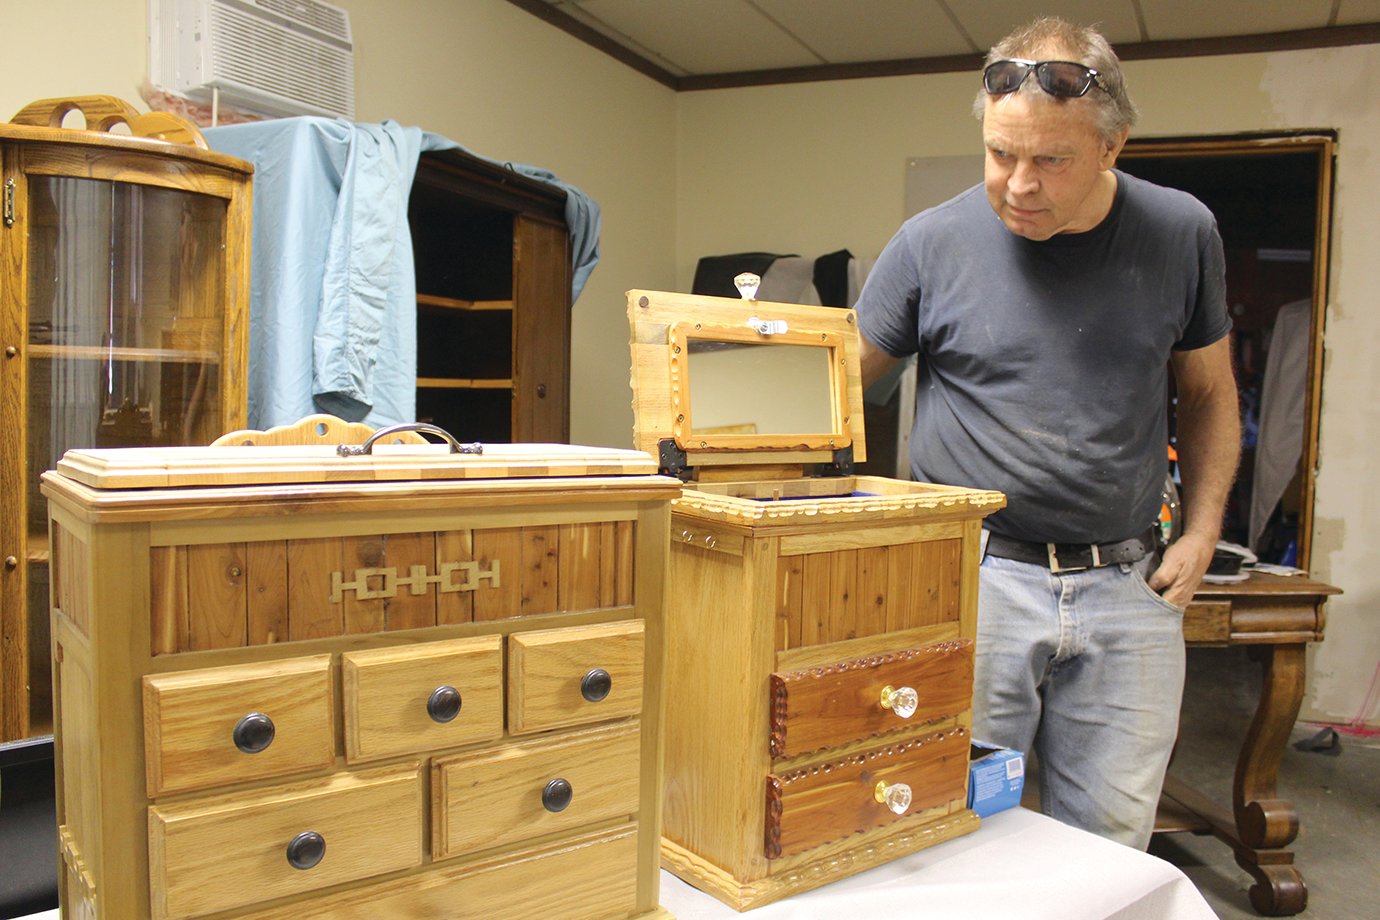 Craftsman Jeff Osborn displays some of his recent woodworking projects Monday inside an old business he purchased on East Main Street. Osborn looks to open a business in the dilapidated building this fall following extensive renovation efforts.